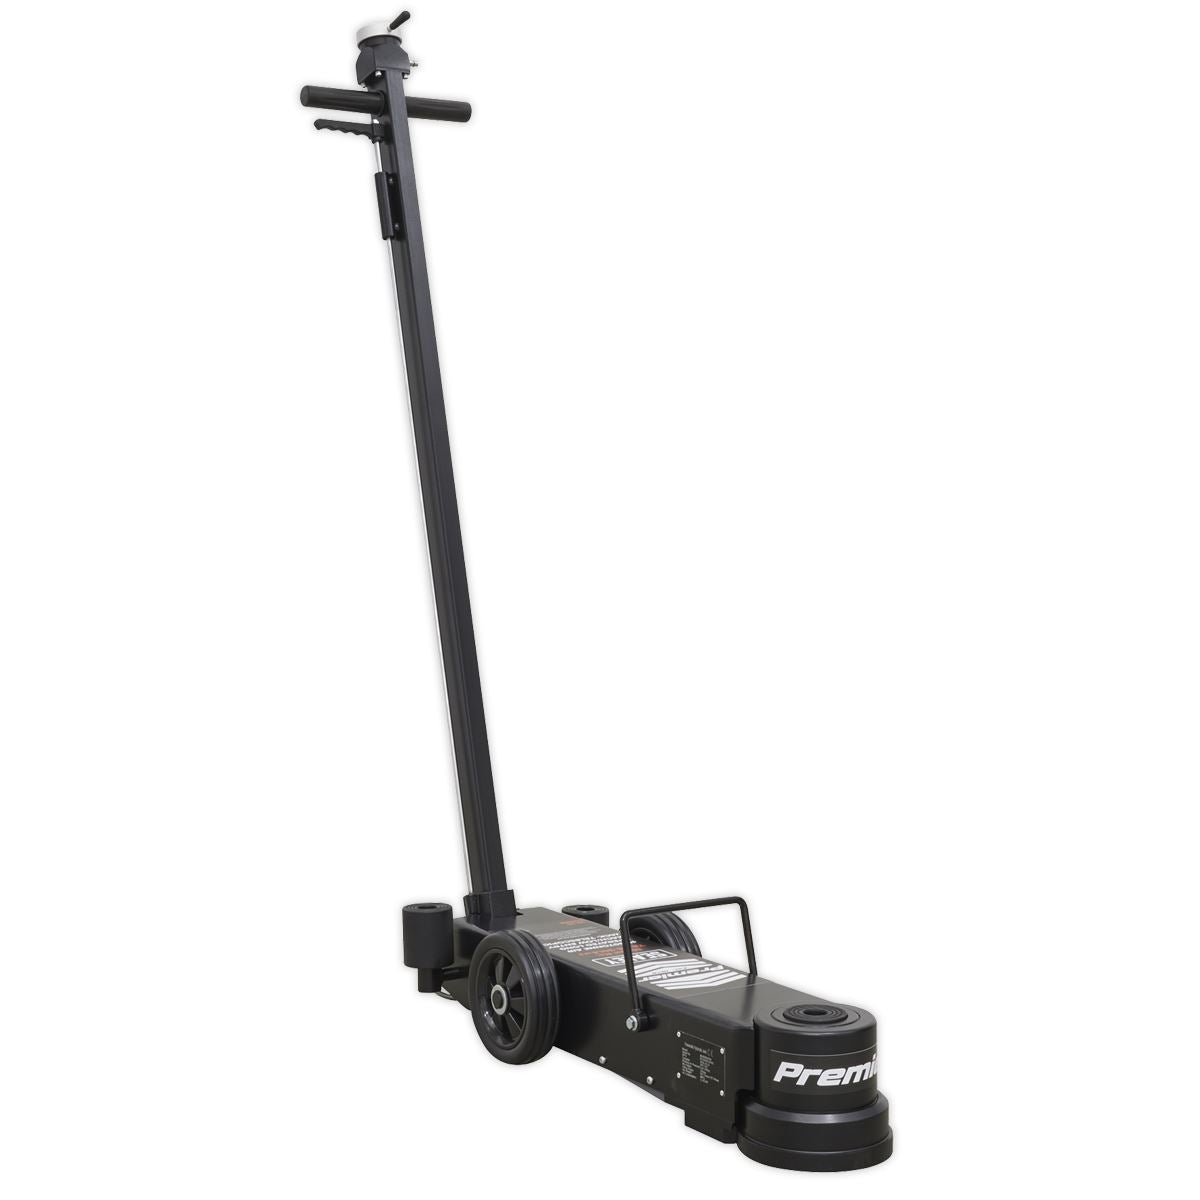 Sealey Long Reach/Low Profile Air Operated Telescopic Jack 15-30 Tonne